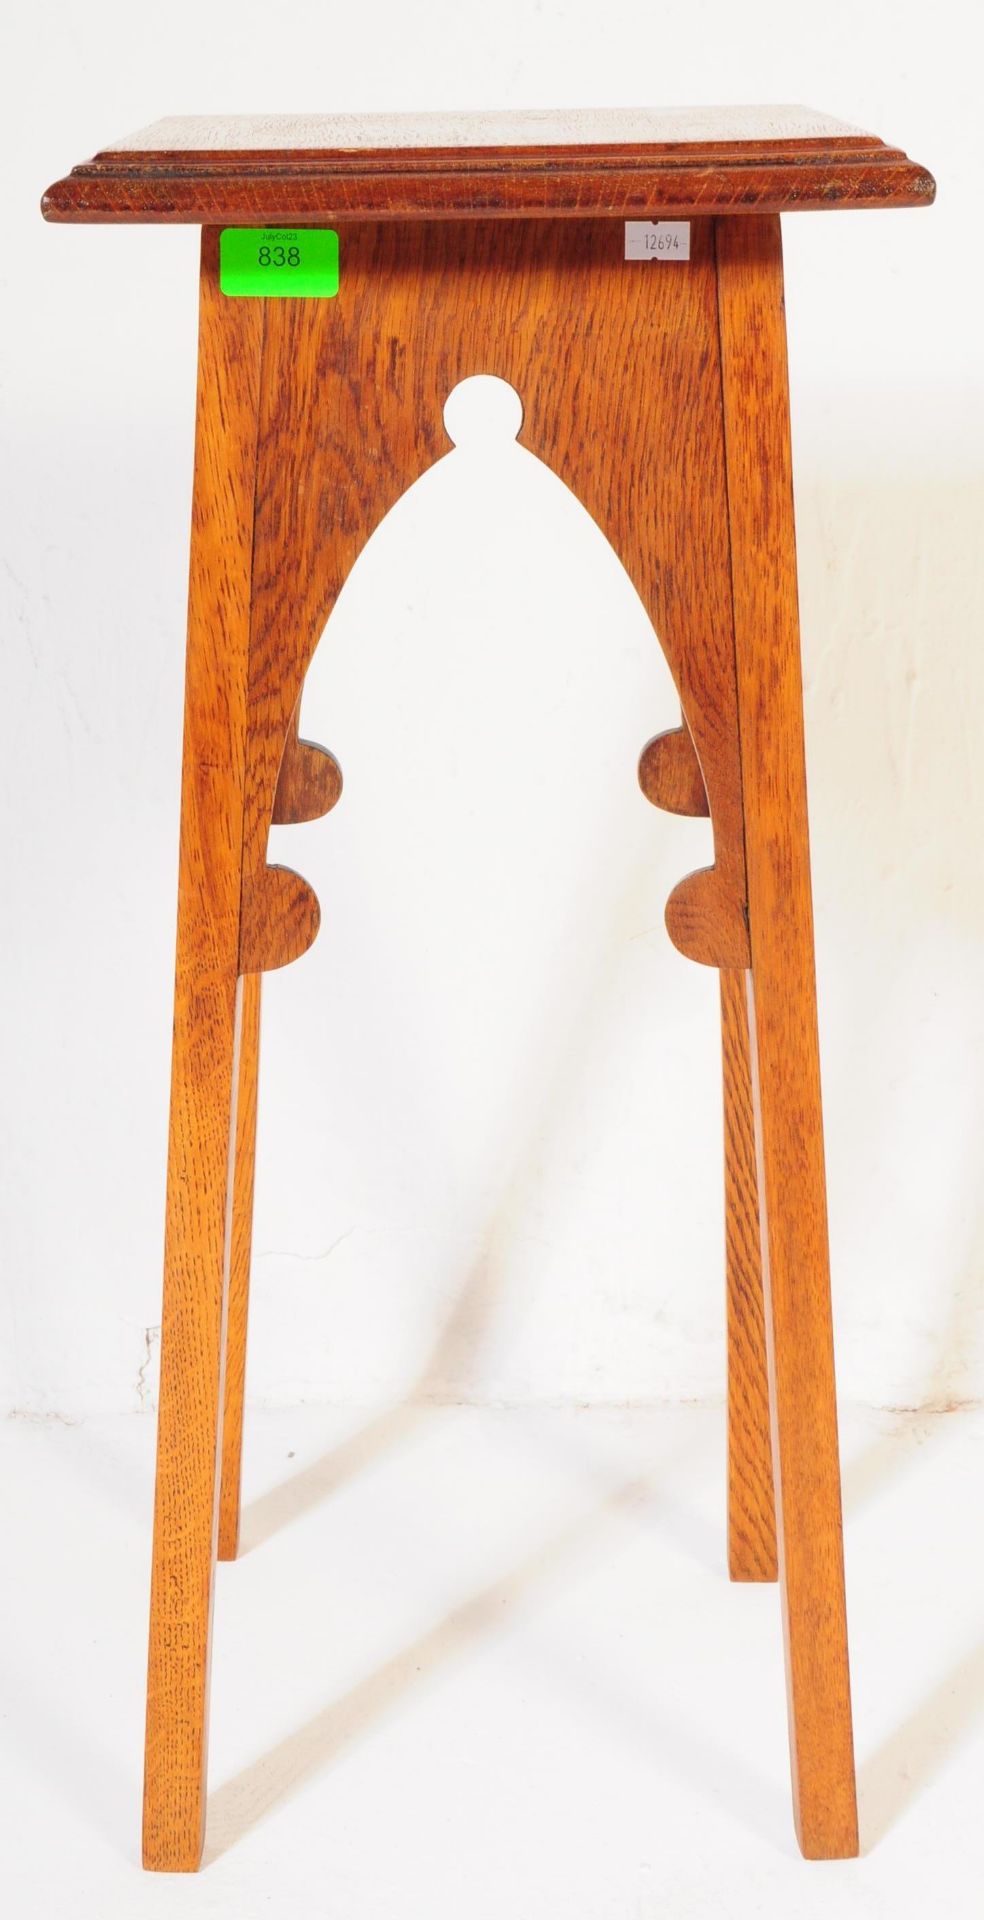 EARLY 20TH CENTURY ARTS & CRAFTS MOORISH STYLE PLANT STAND - Image 2 of 5